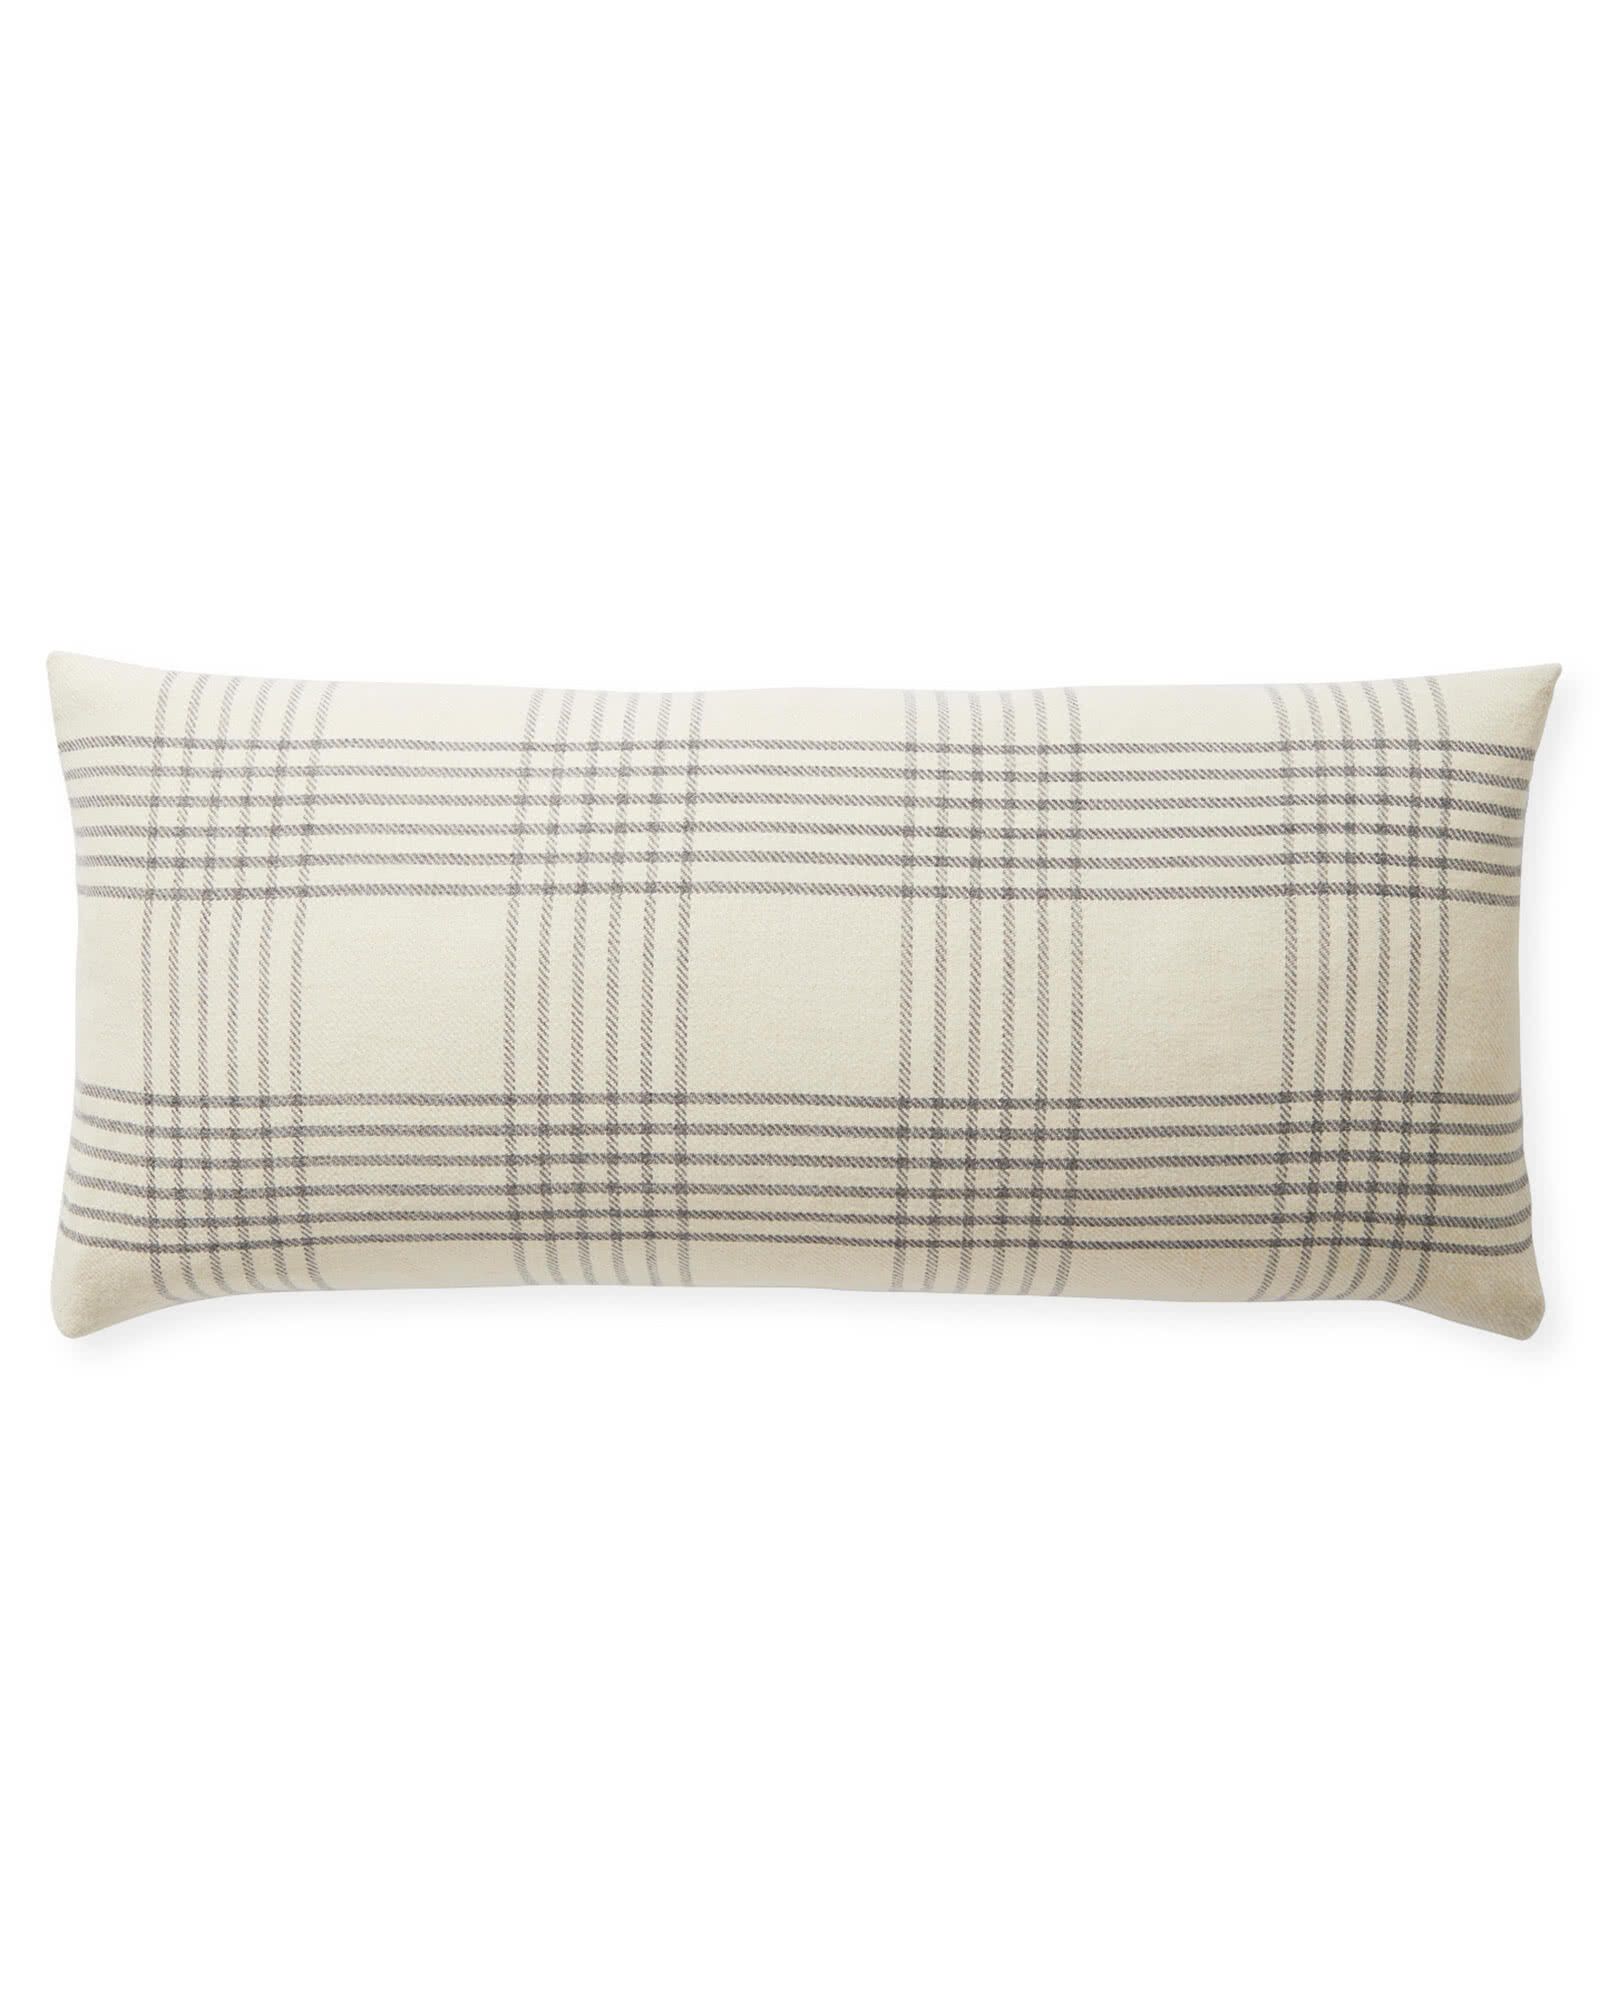 Blakely Plaid Pillow Cover | Serena and Lily